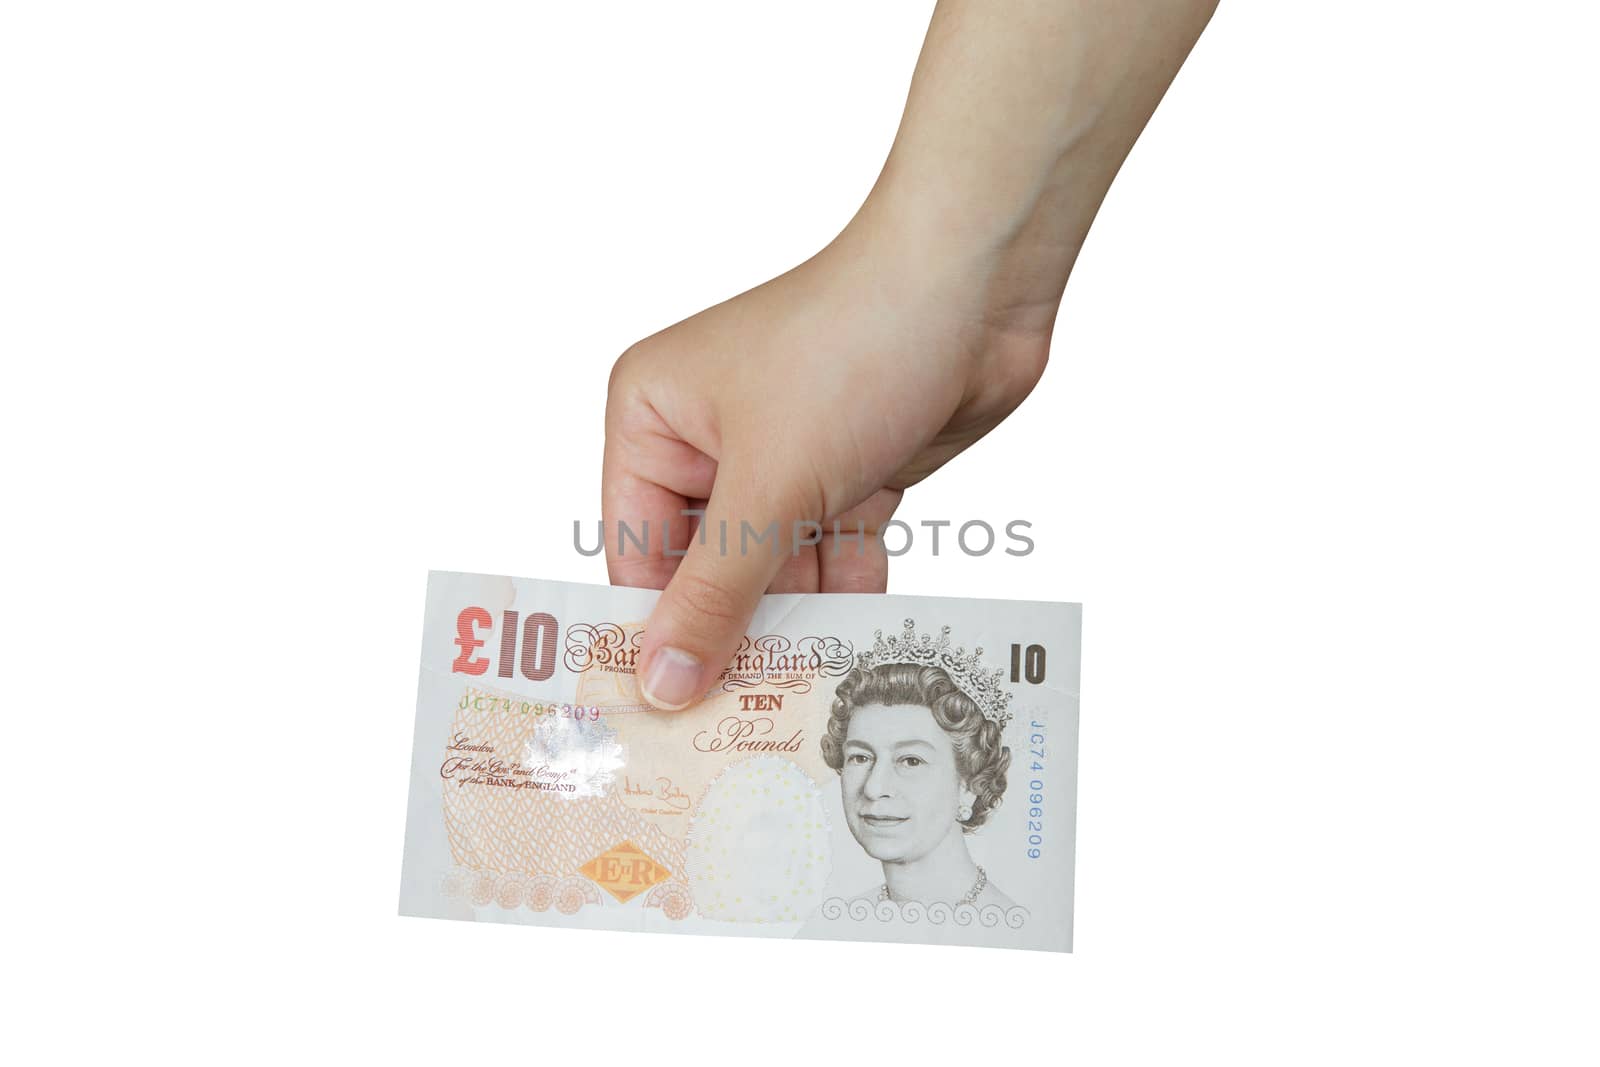 Hand taking a banknote of 10 pounds